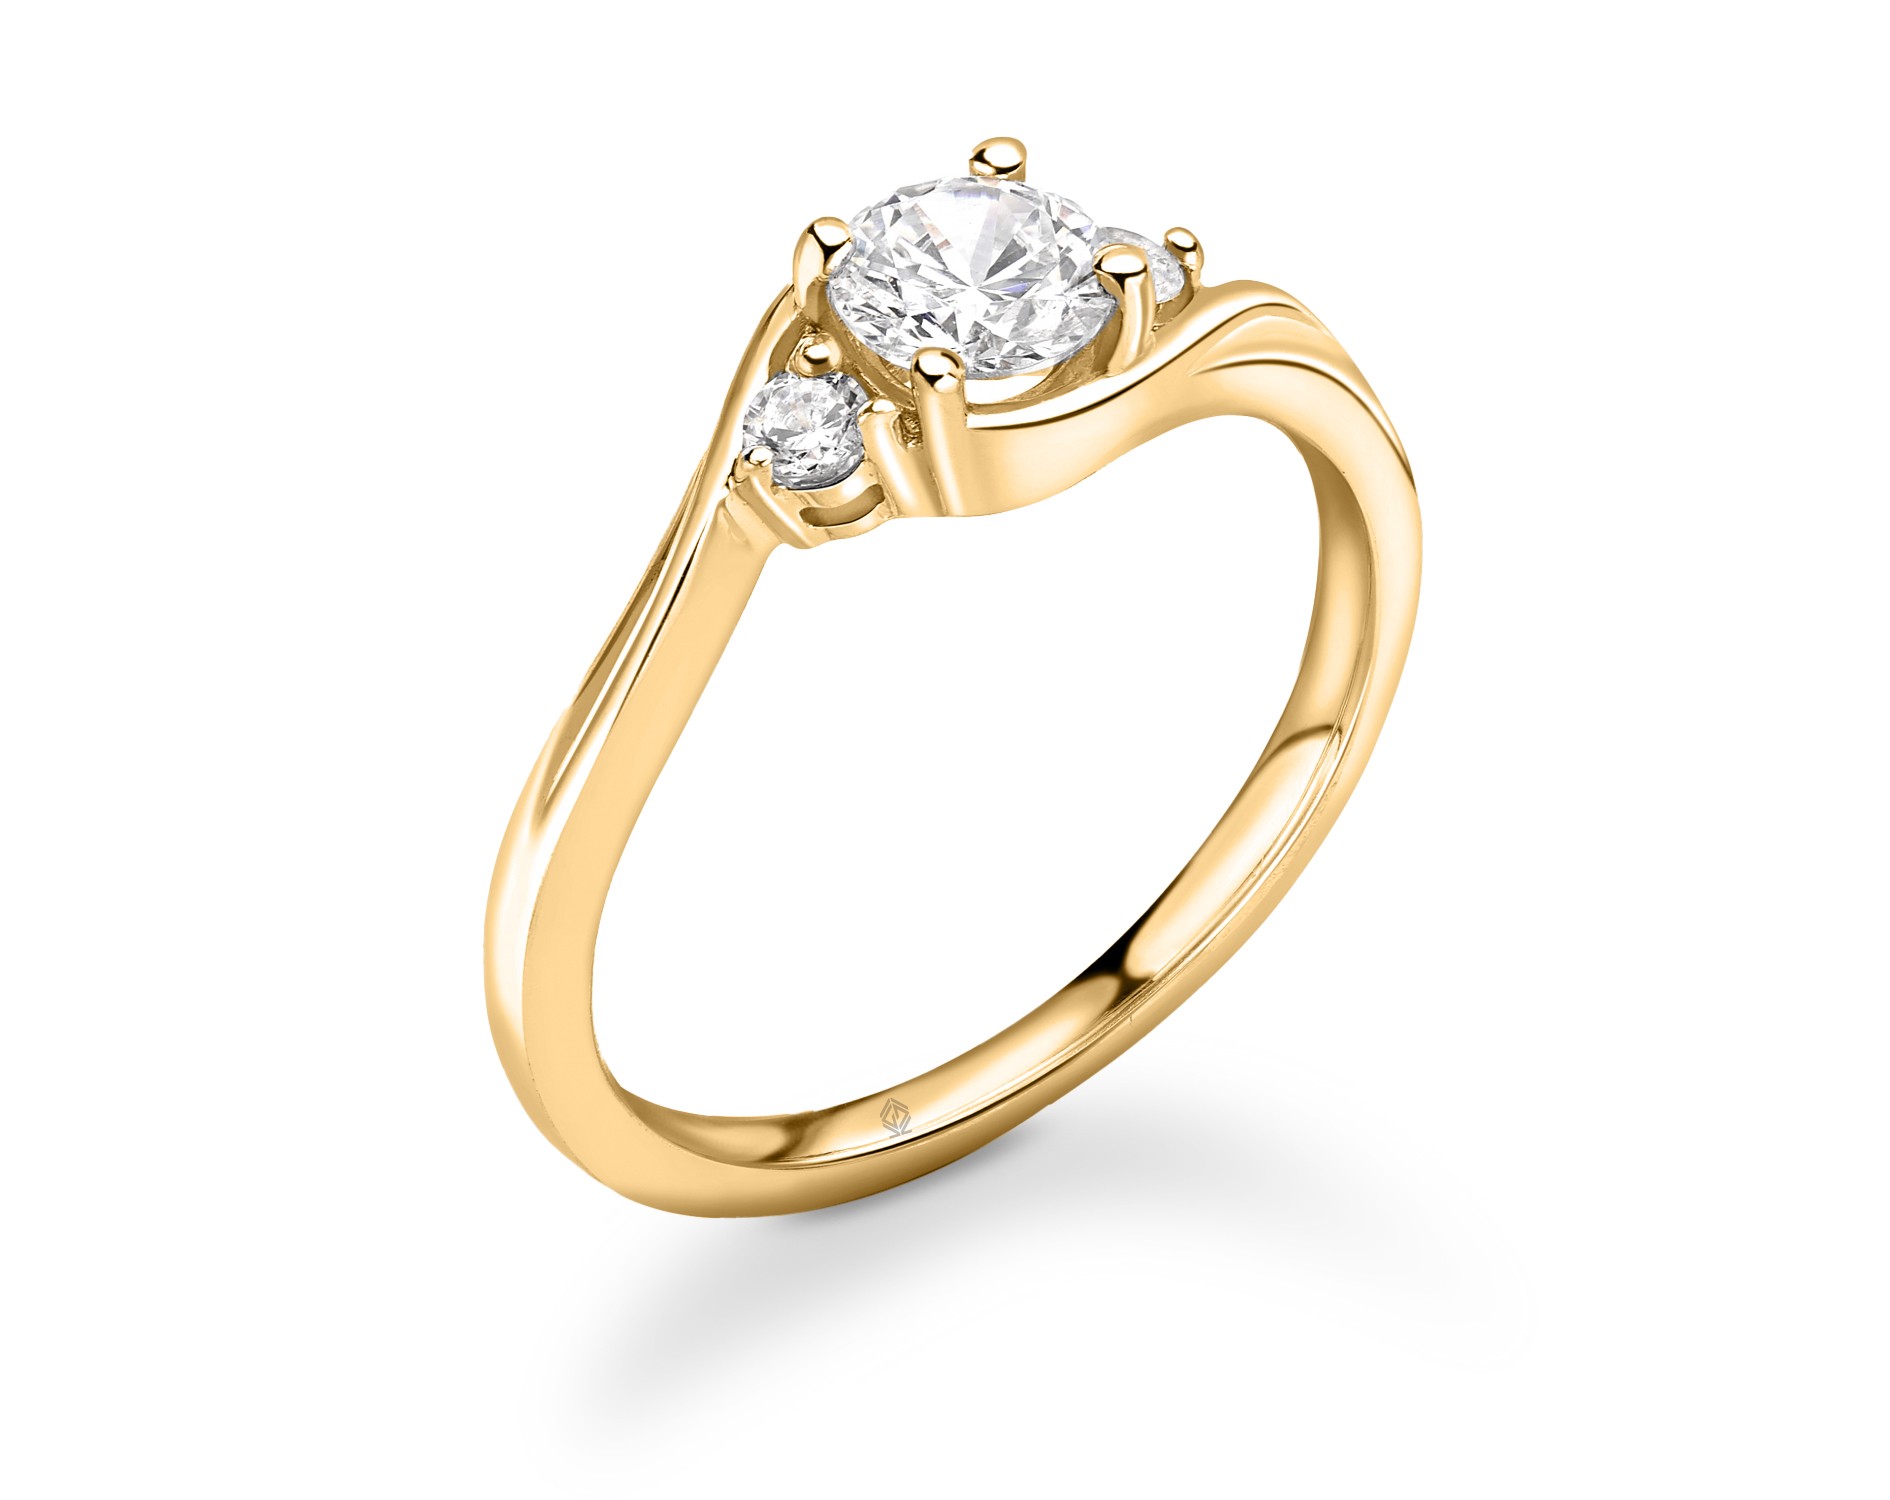 18K YELLOW GOLD ROUND CUT TRILOGY DIAMOND ENGAGEMENT RING WITH TWISTED SHANK